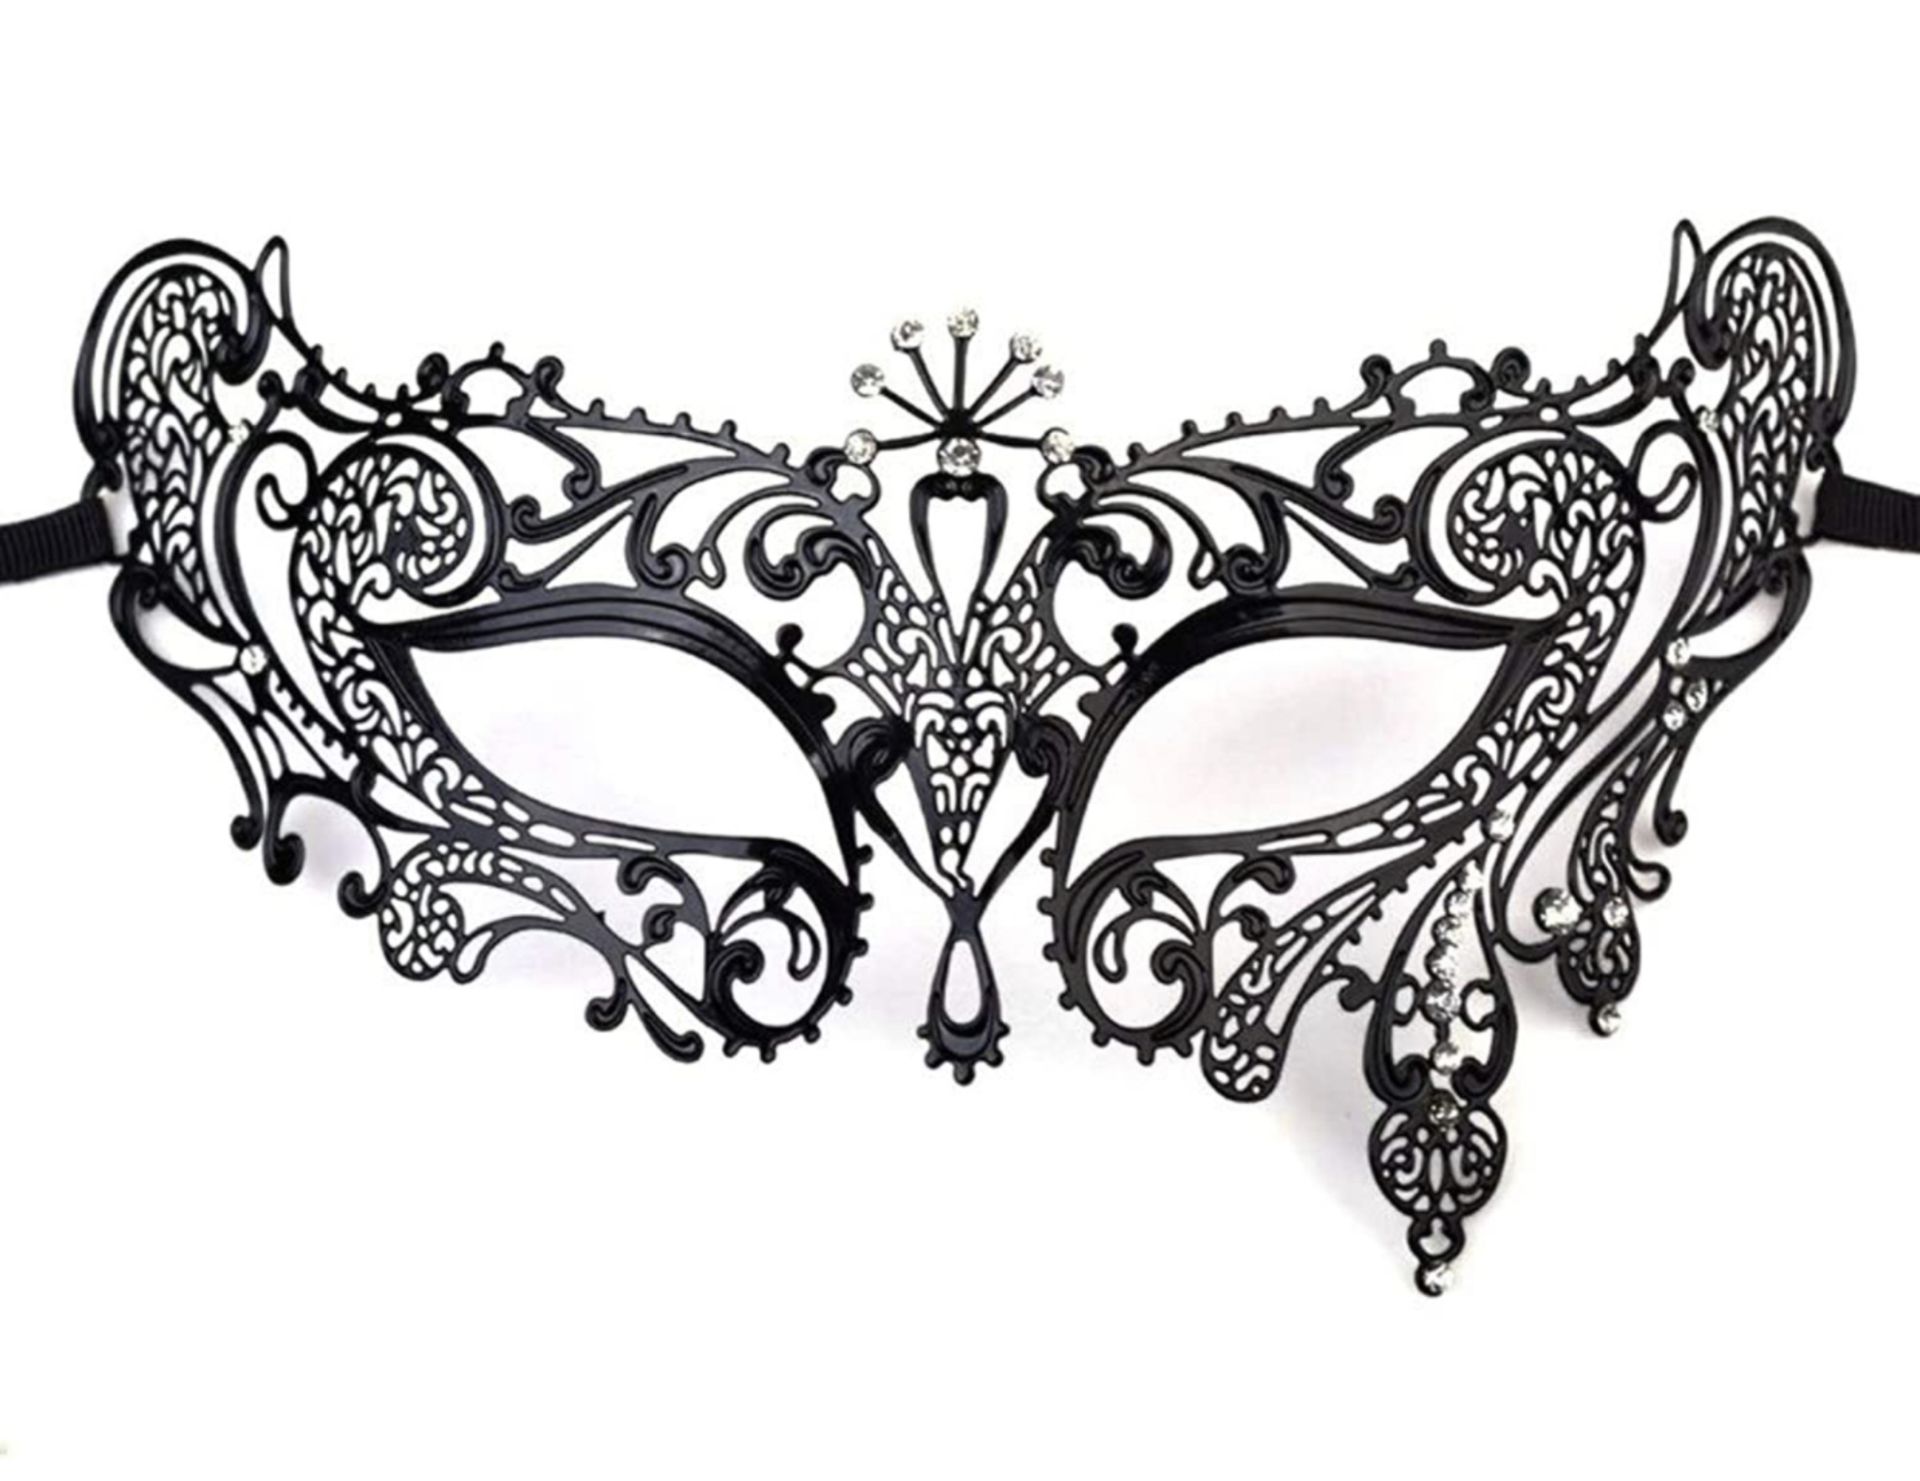 RRP £250 Collection of Lady of Luck Venetian Masks Metal Masquerade Masks, 18 Pieces - Image 2 of 3